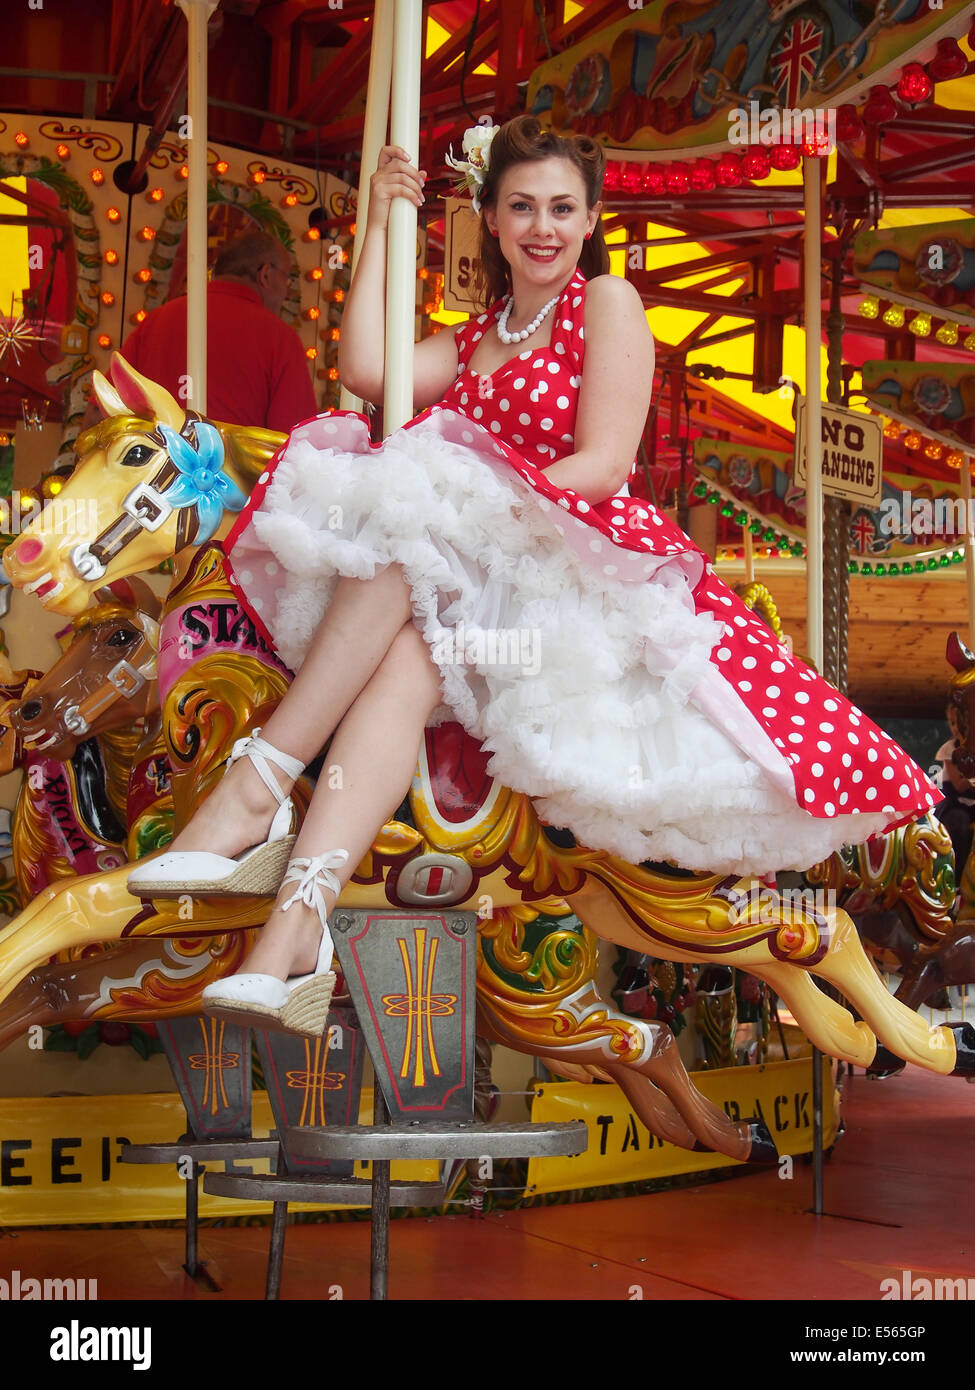 Girl in a red polka dot dress on a carousel Stock Photo - Alamy